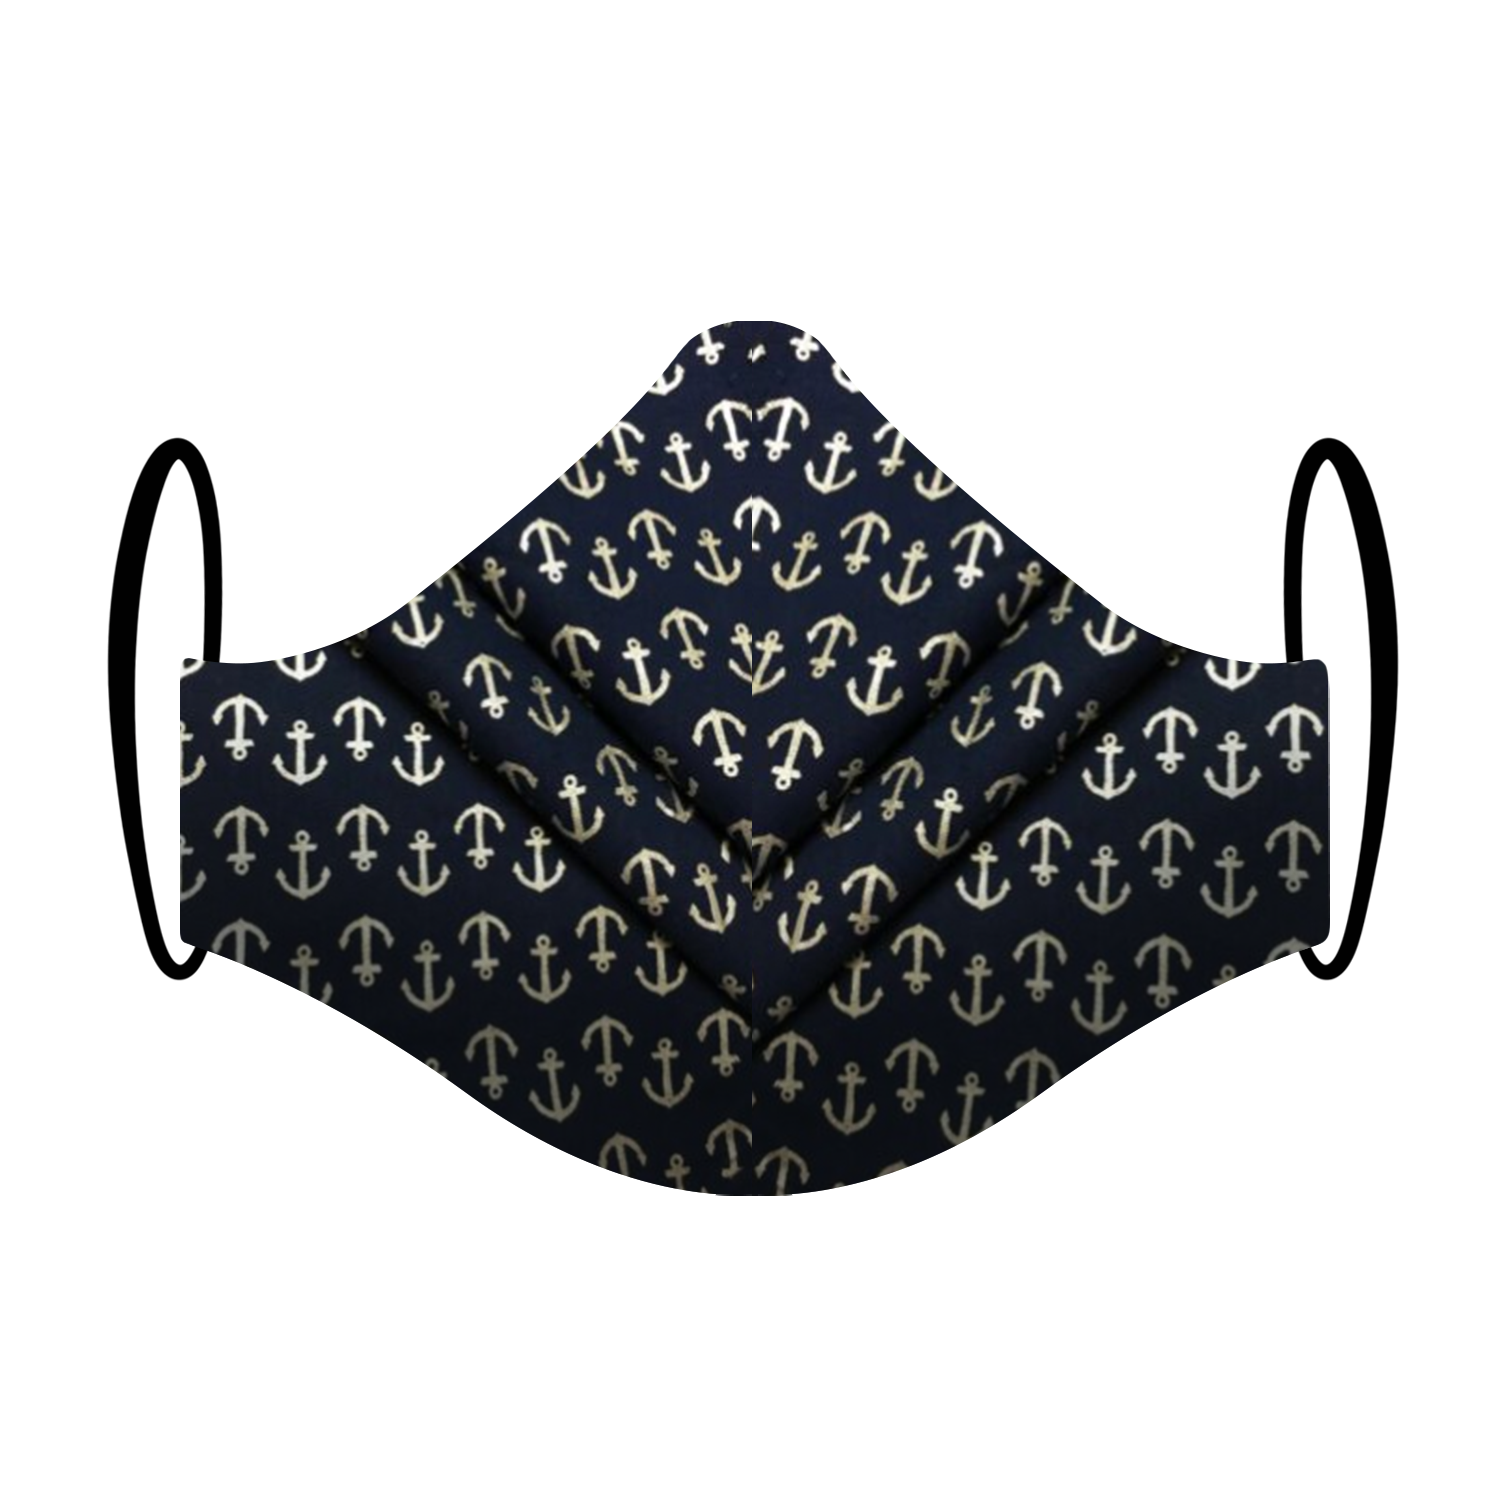 Triple layered face mask made in Melbourne Australia from cotton and poplin featuring a unique nautical anchor sailor print